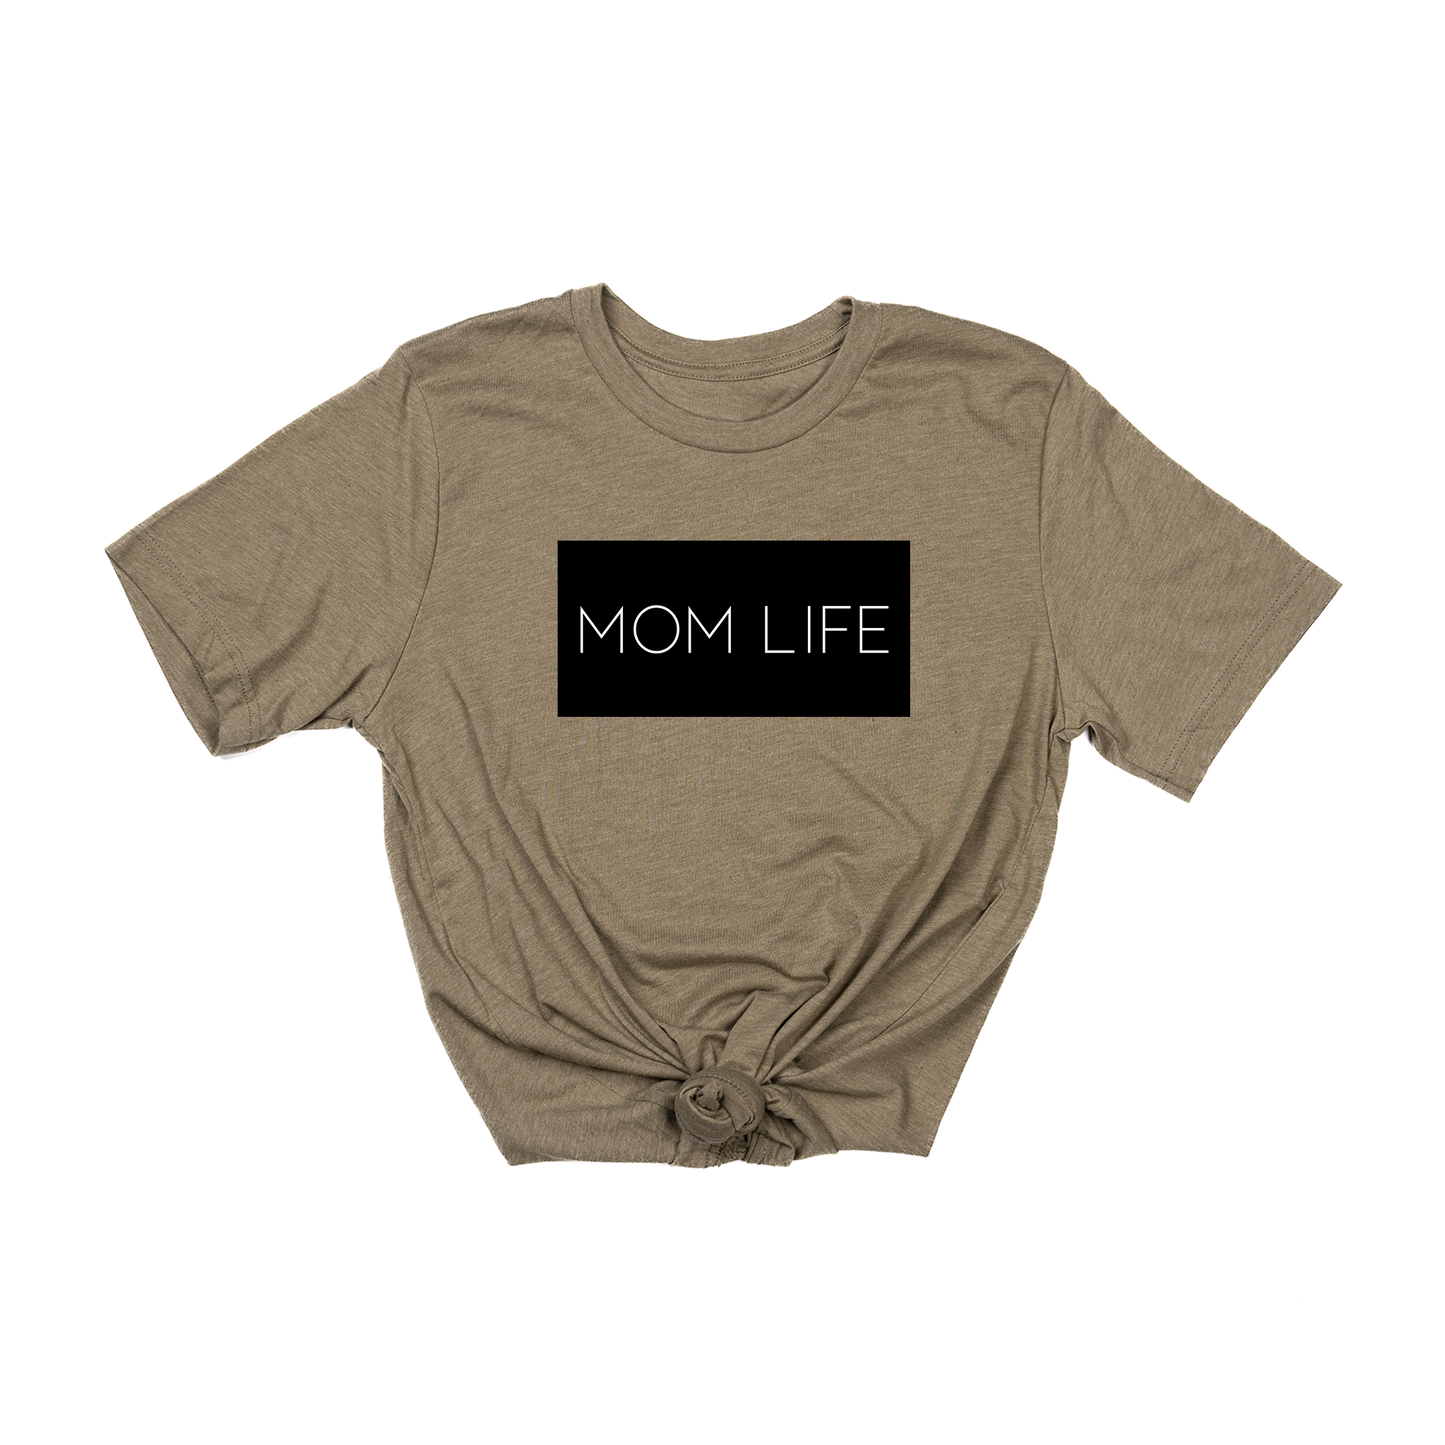 Mom Life (Boxed Collection, Black Box/White Text, Across Front) - Tee (Olive)